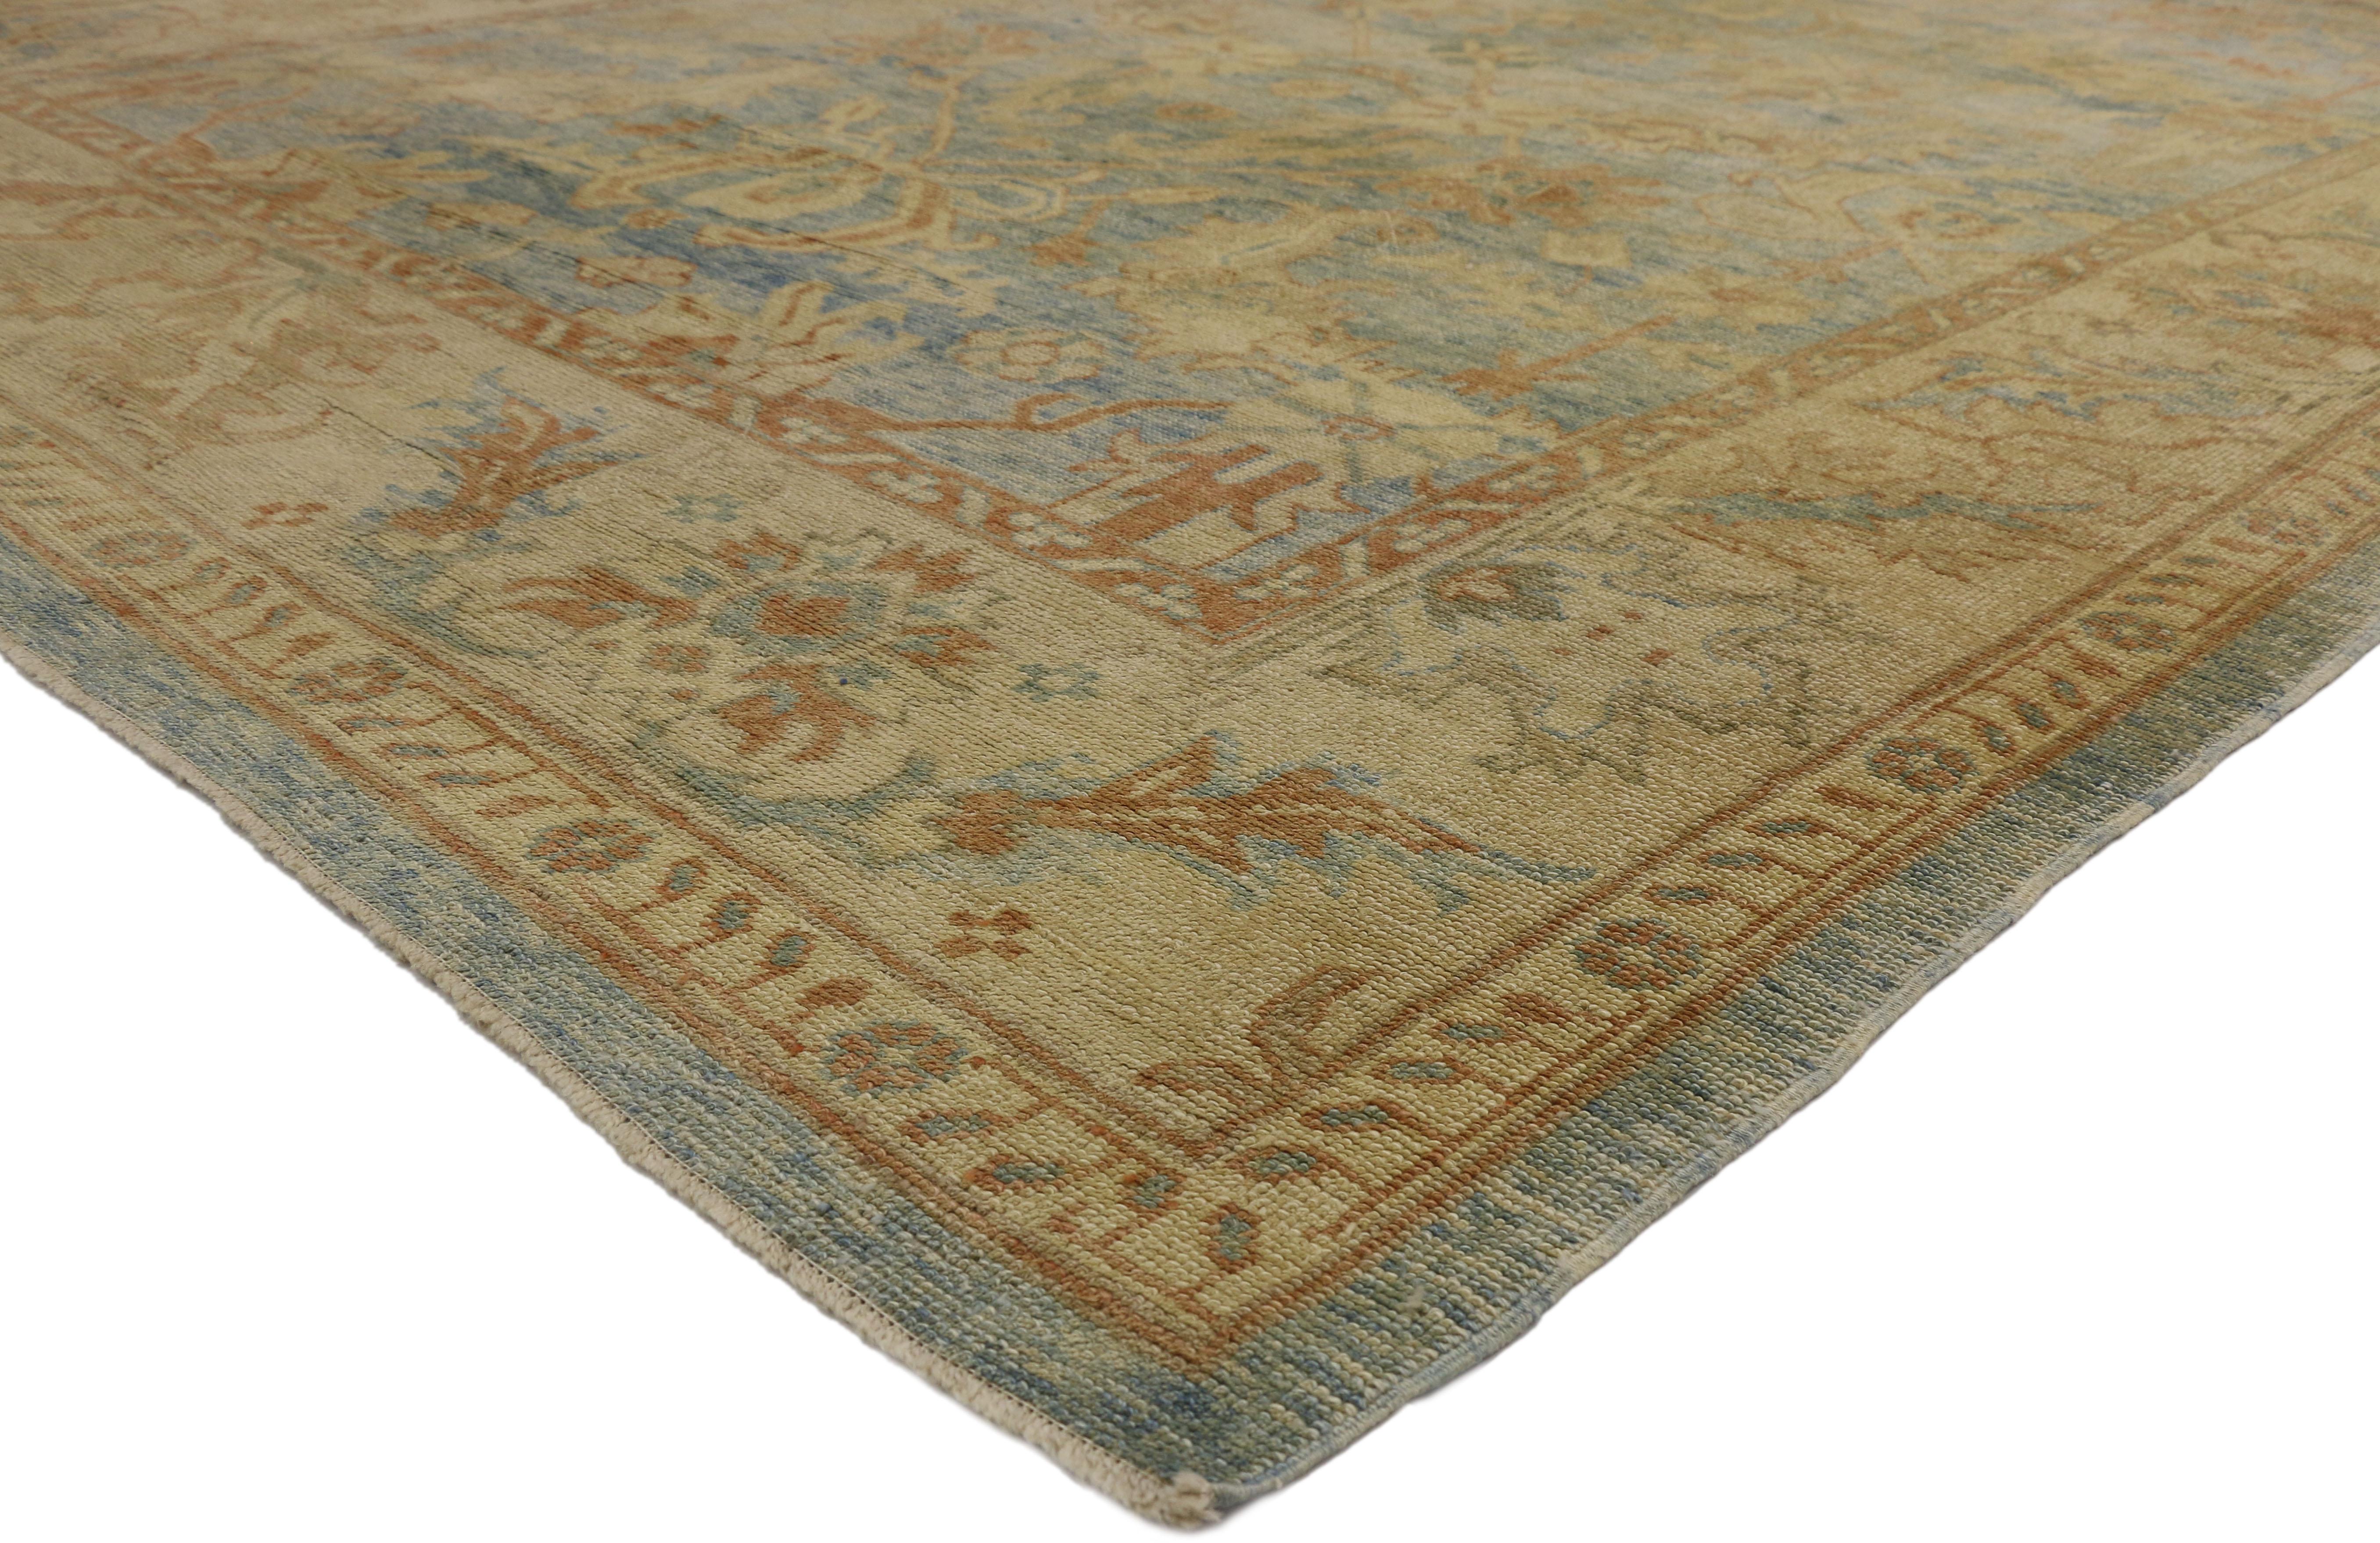 76891 New Contemporary Turkish Oushak Rug with Coastal Cottage Neoclassical Style. Blending elements from the modern world and Neoclassical style, this hand knotted wool contemporary Turkish Oushak rug beautifully balances new and old. It features